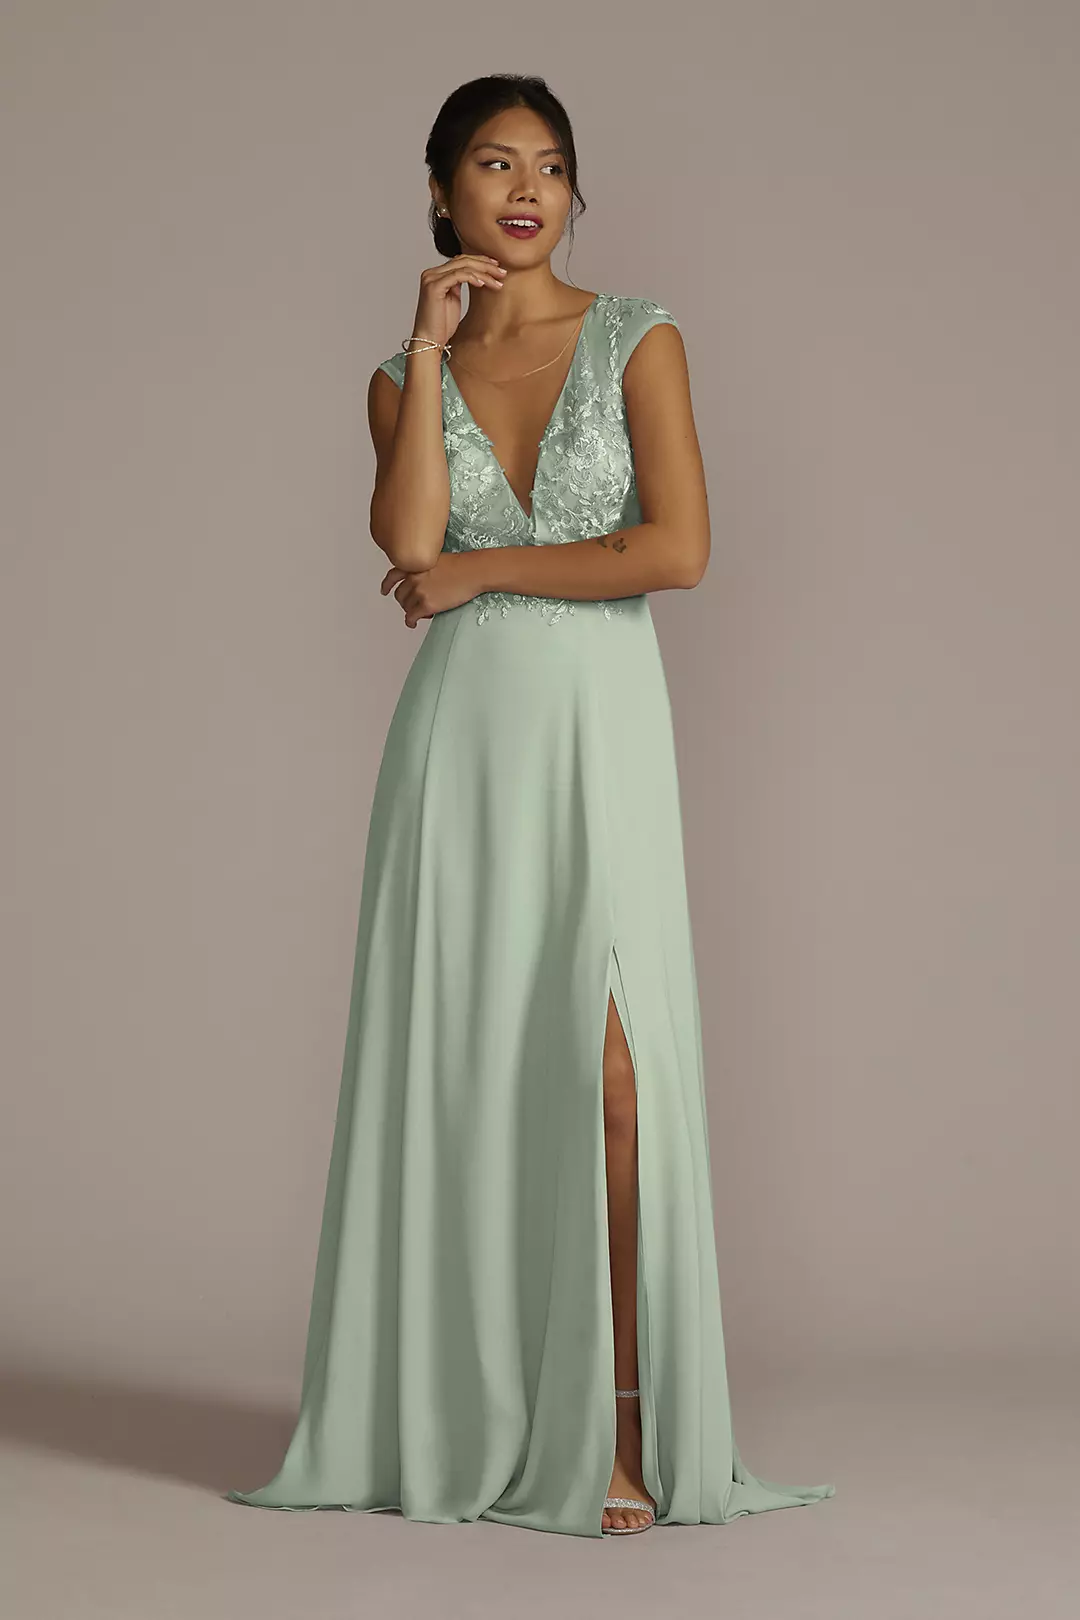 Cap Sleeve Lace and Georgette Bridesmaid Dress Image